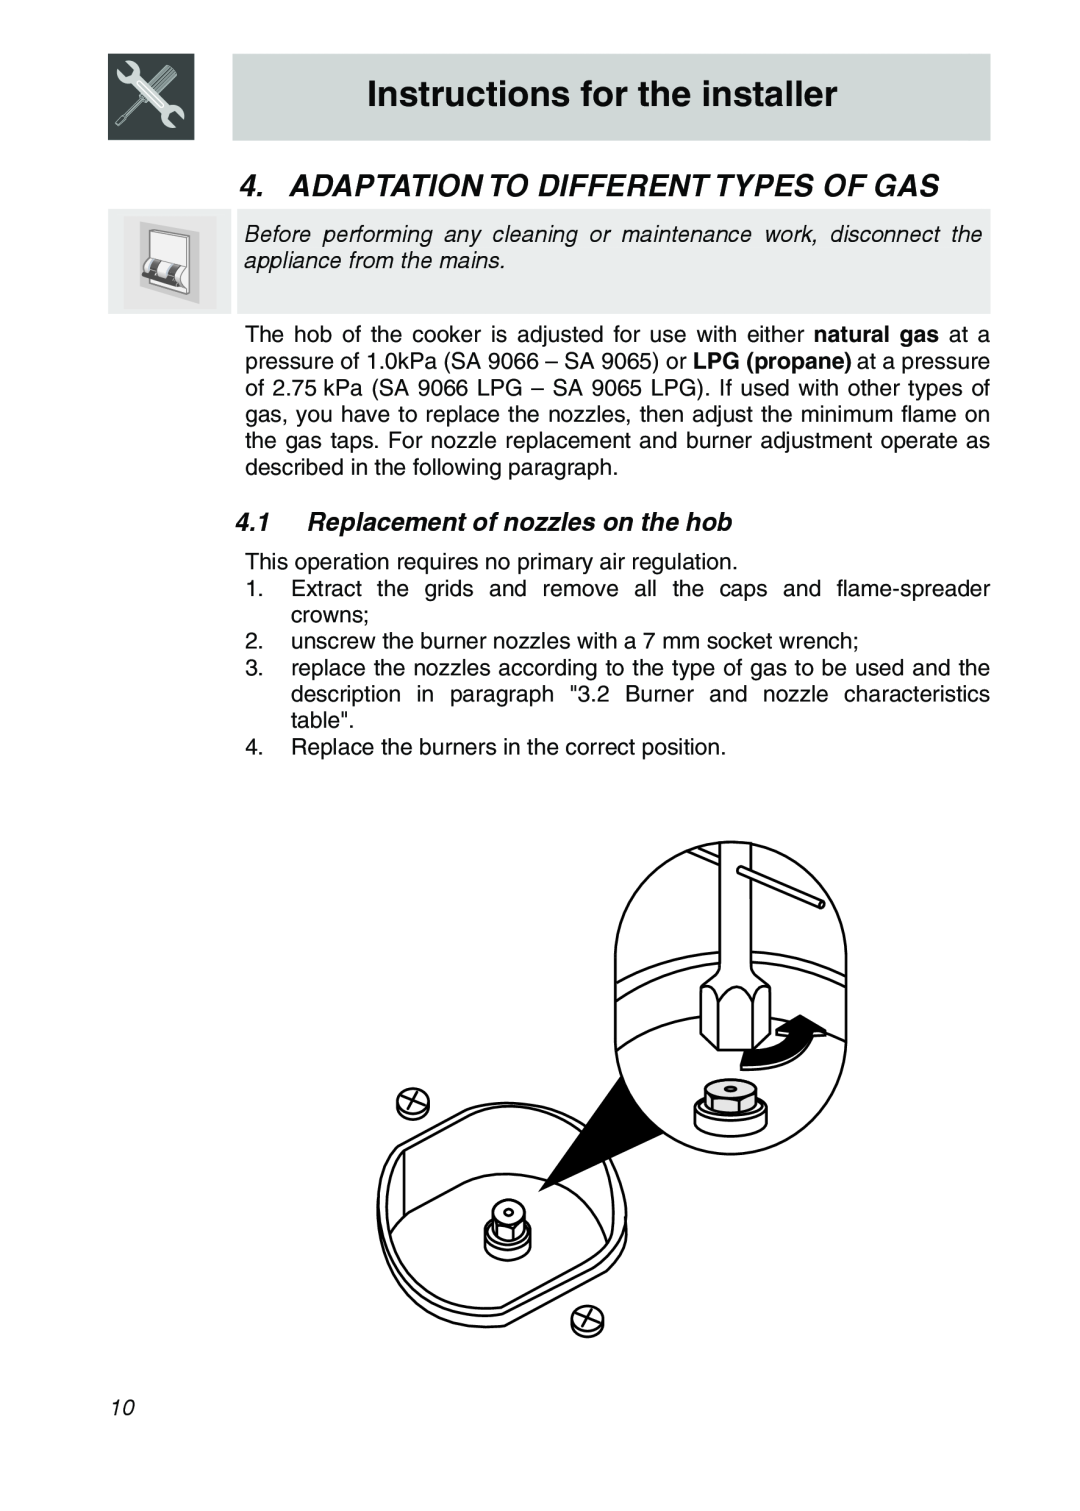 Smeg SA9065XNG Adaptation To Different Types Of Gas, Replacement of nozzles on the hob, Instructions for the installer 